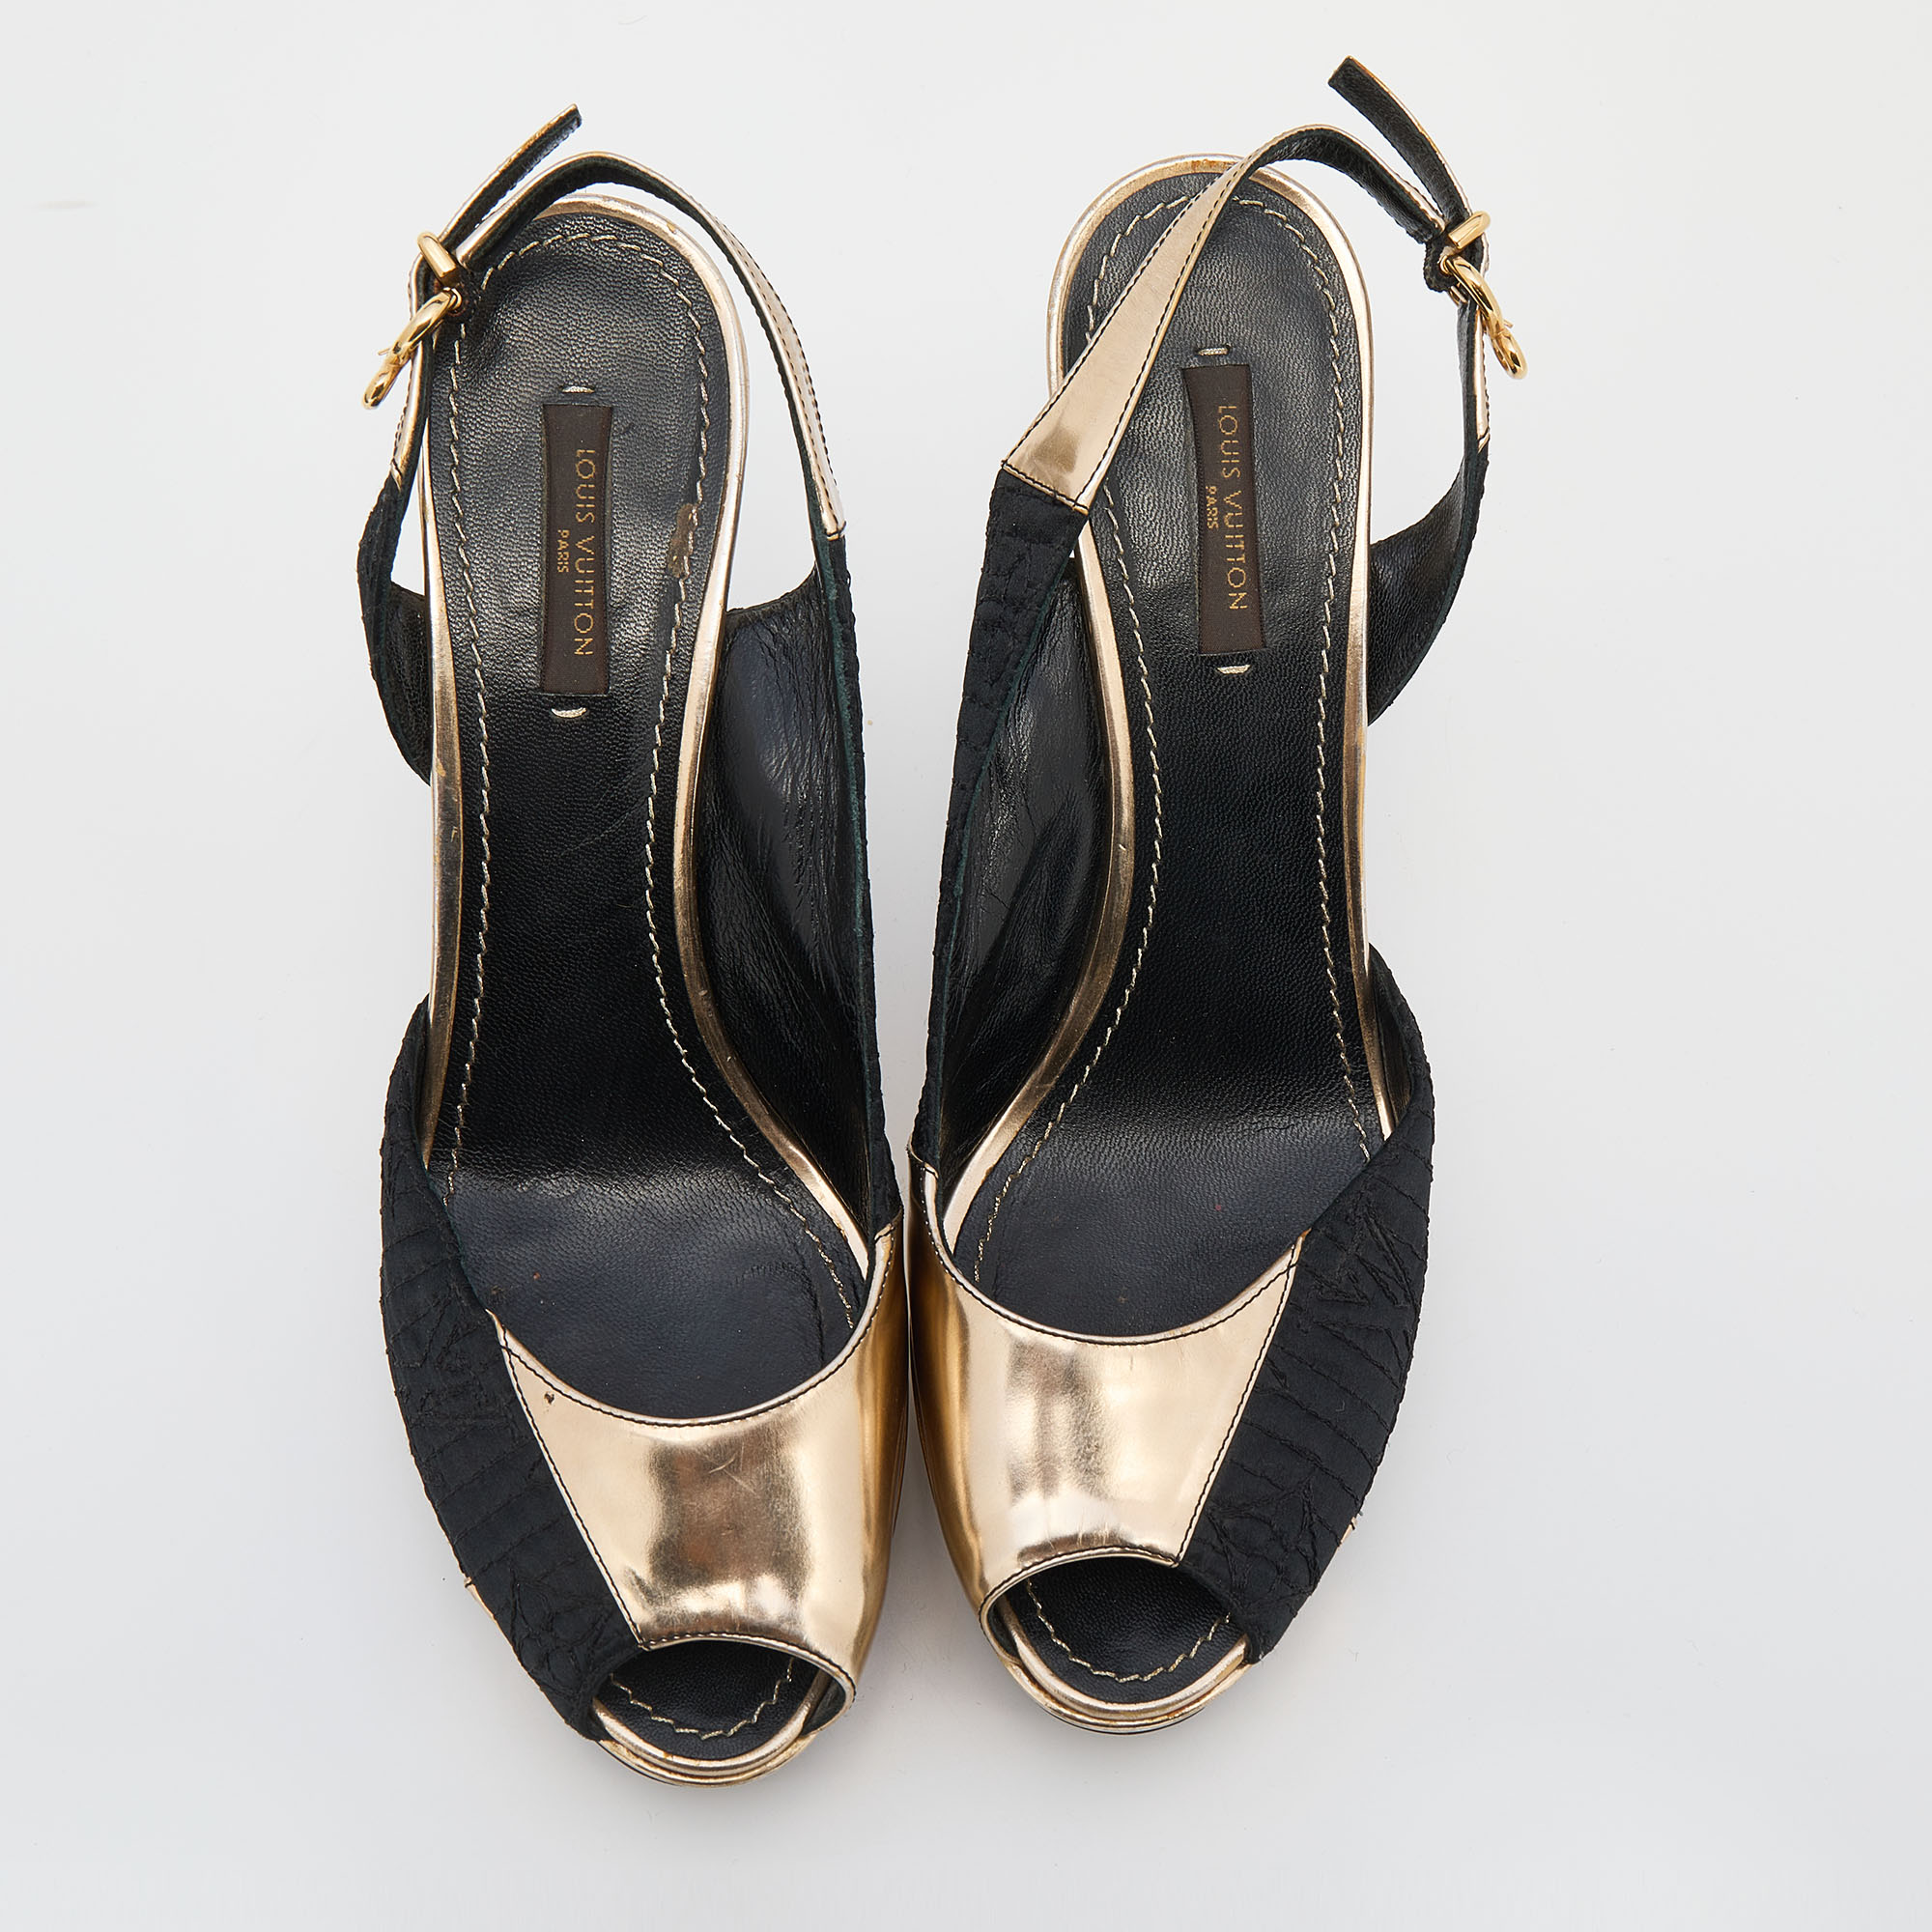 Louis Vuitton Black/Gold Leather And Fabric Ankle Strap Platform Sandals Size 37.5